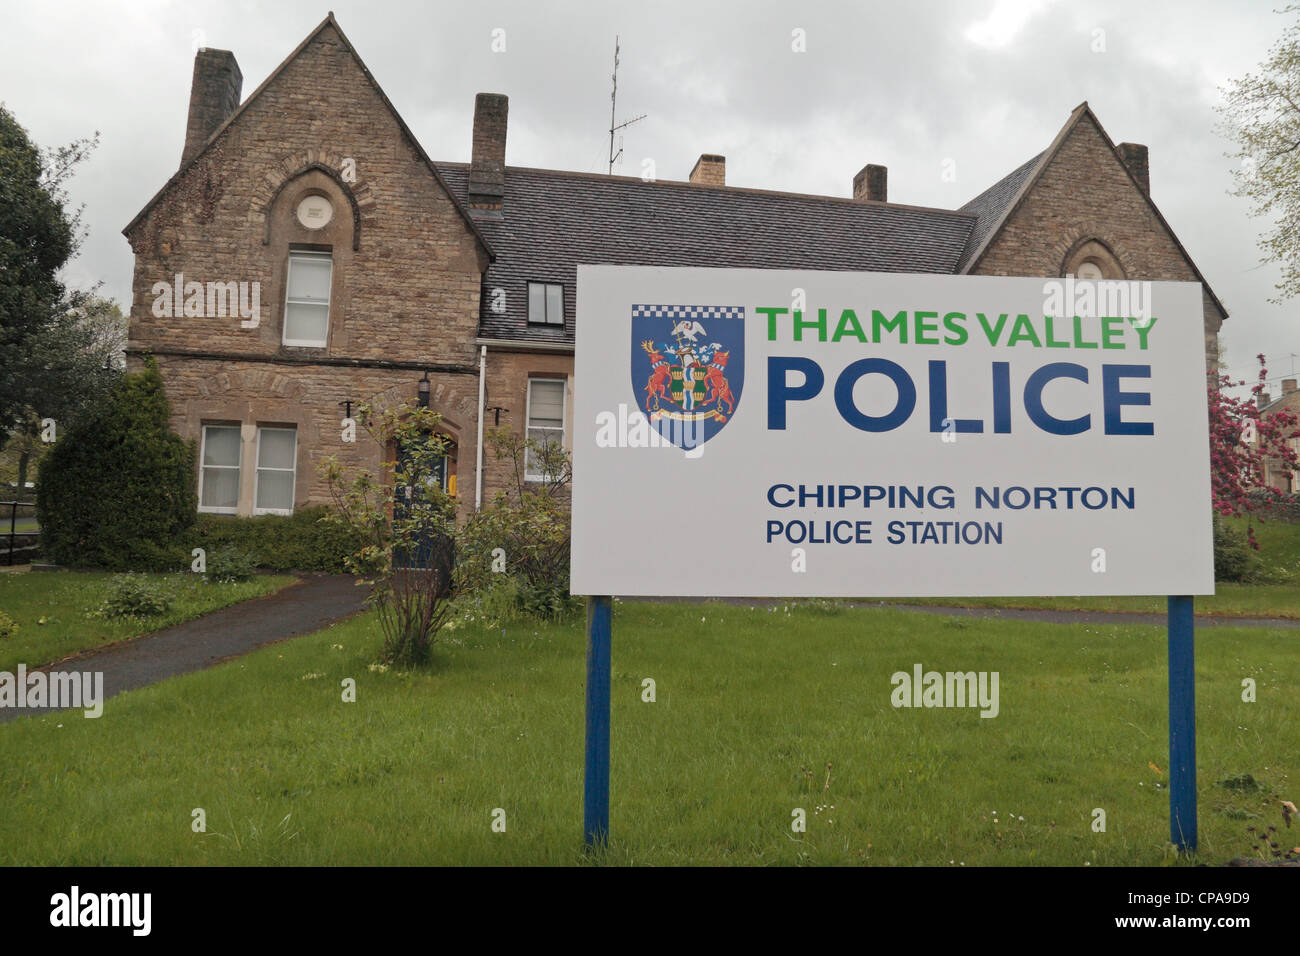 The Chipping Norton Police Station (Thames Valley Police) in Chipping Norton, Oxfordshire, UK. Stock Photo